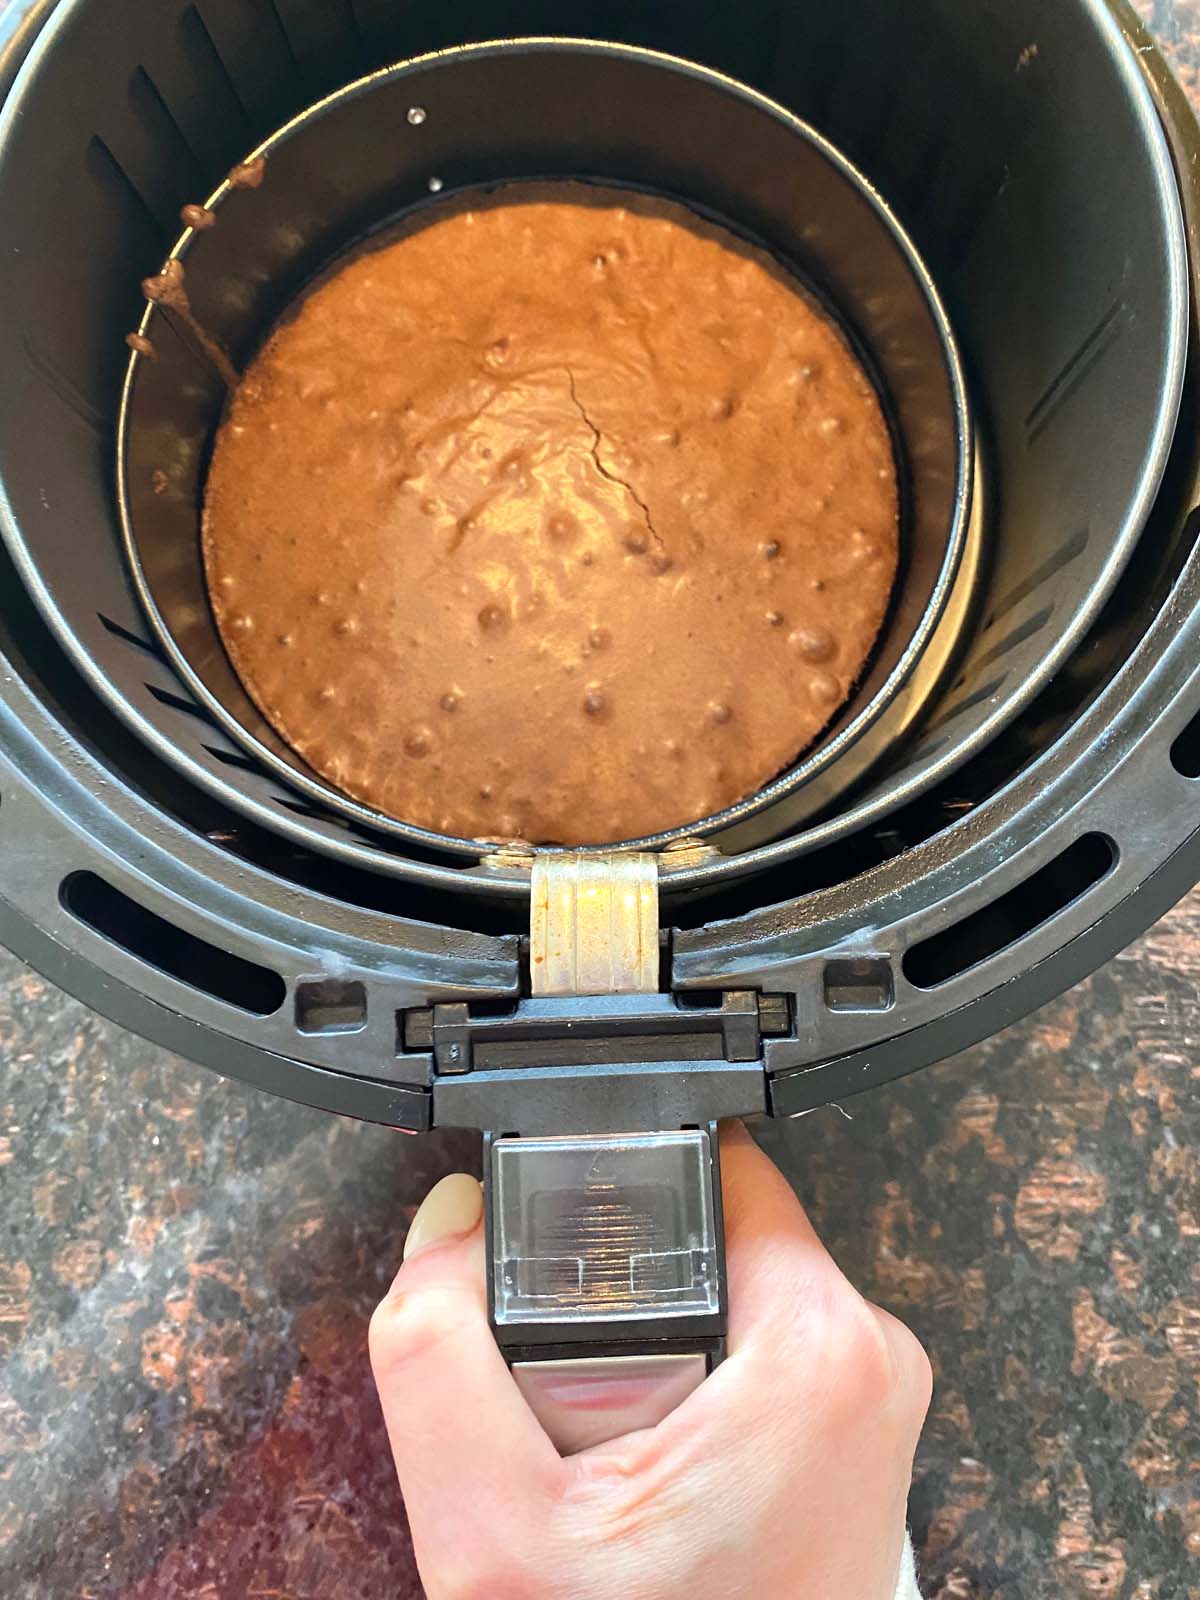 Brownie in a springform pan being removed from air fryer.